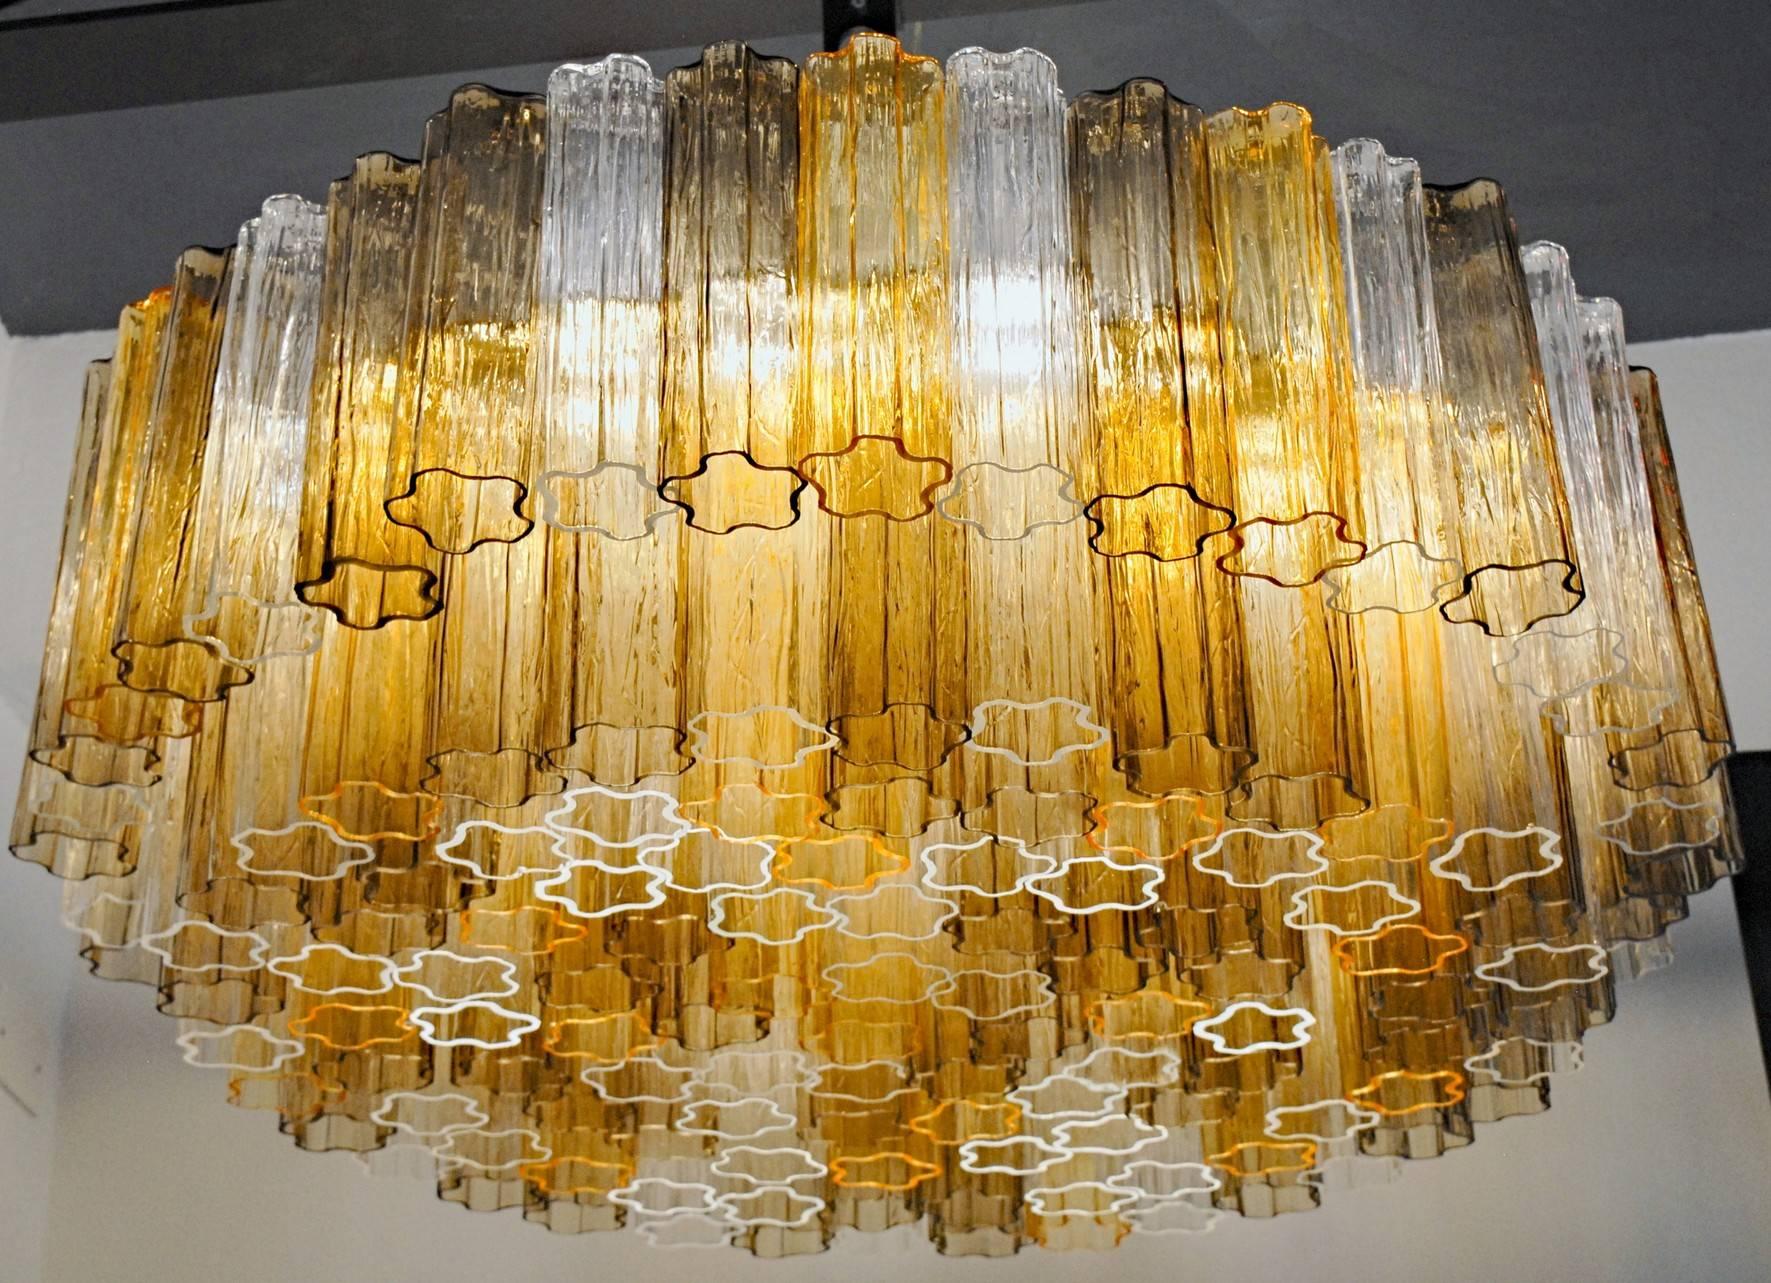 This chandelier was designed by Toni Zuccher for Venini. Rare color combination with amber, clear and taupe gray. The cut at the bottom of each element is highlighted when lit, see pictures. There are more than 120 glass Murano glass blown